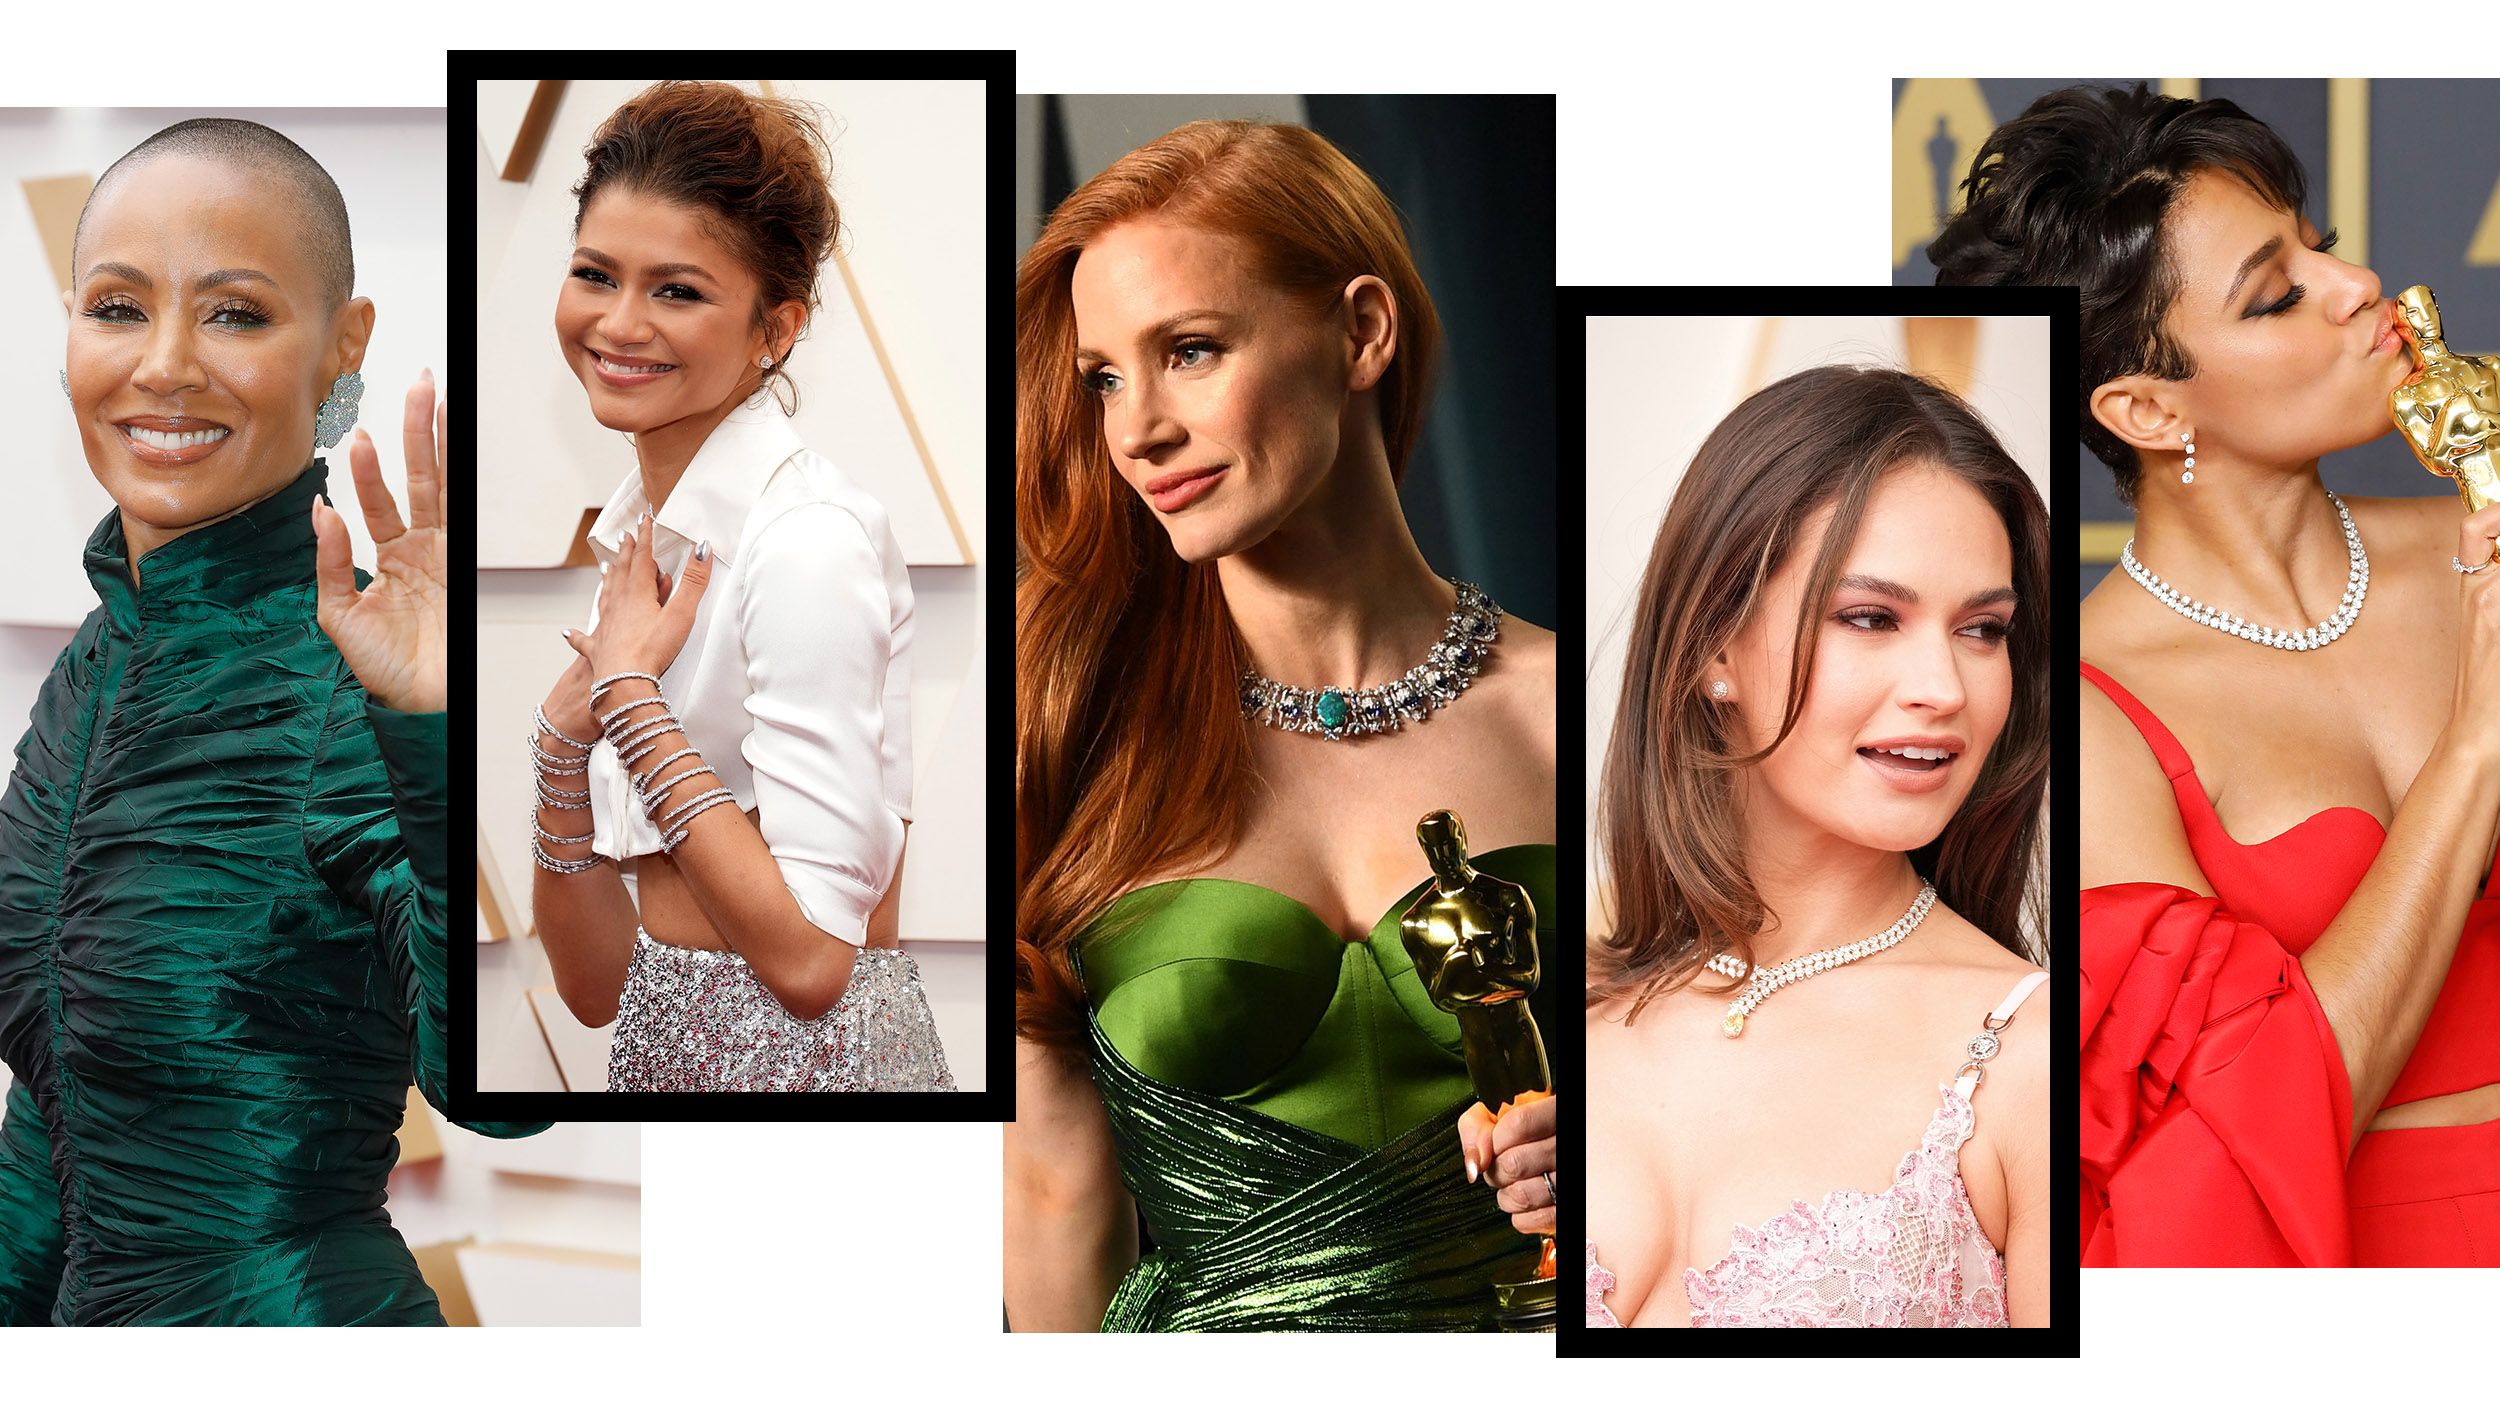 The Most Colorful Jewels Ever Worn at the Oscars